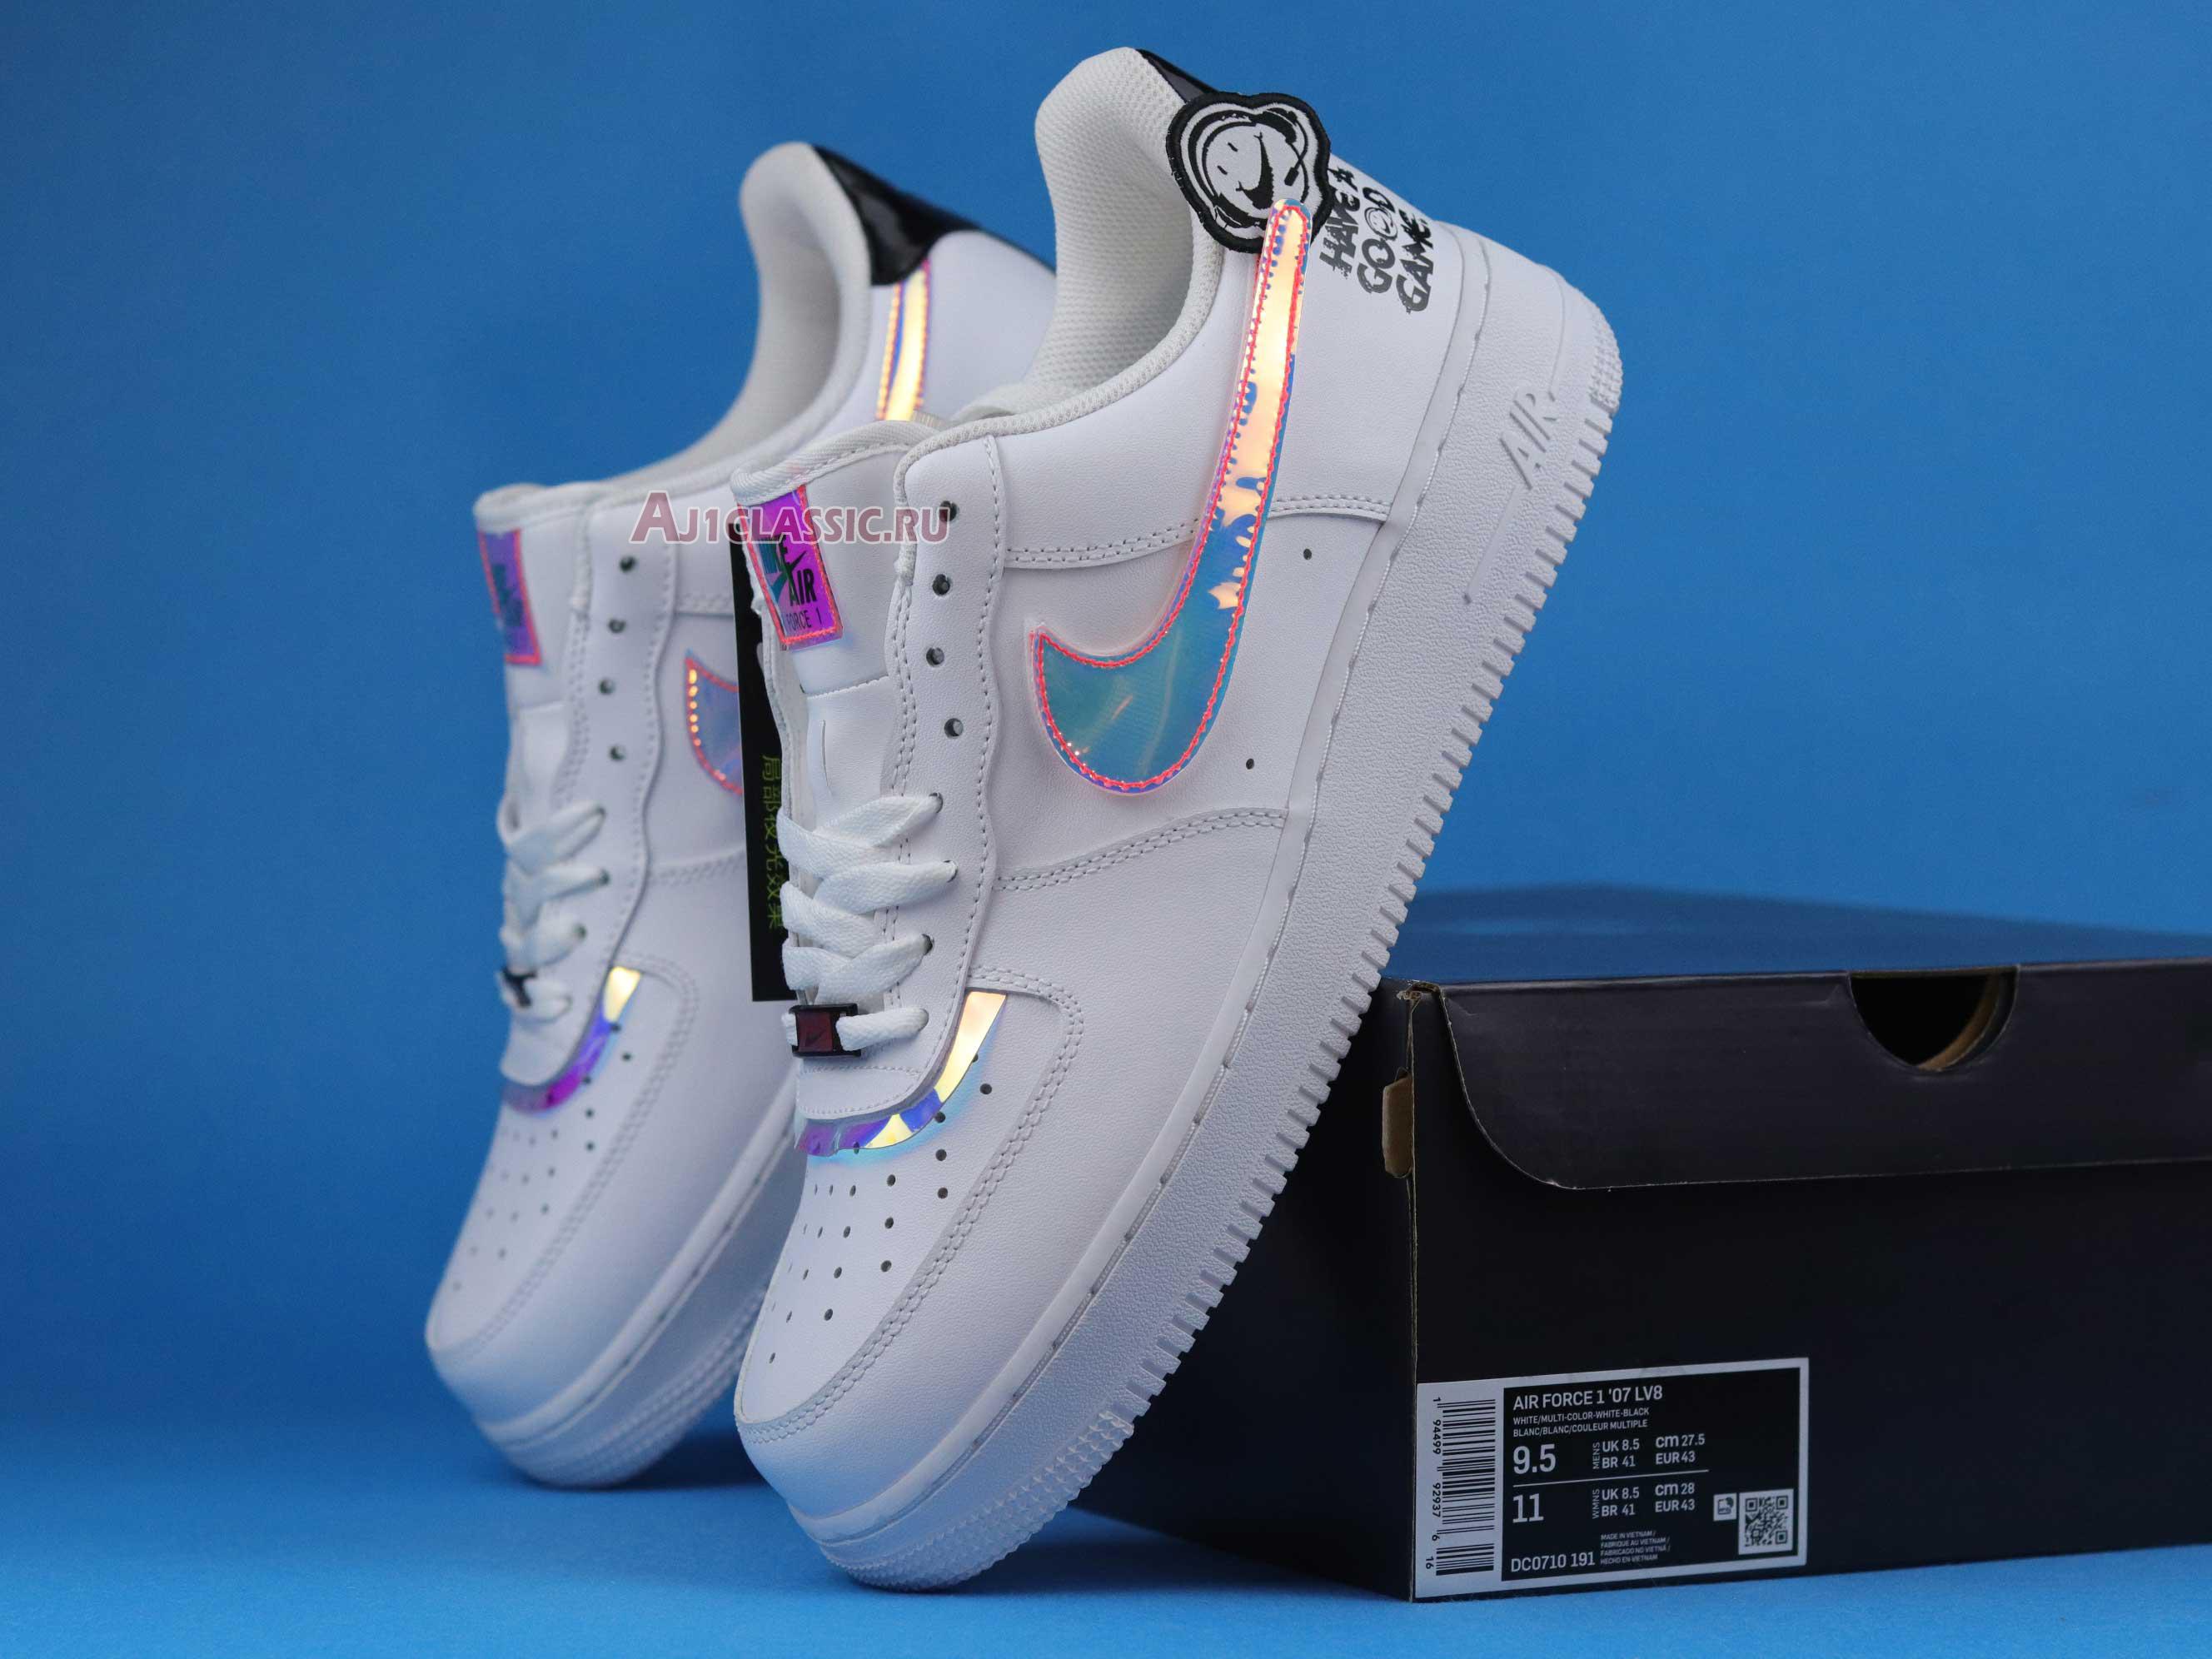 Nike Air Force 1 07 LV8 Have a Good Game DC0710-191 White/Multi-Color/White/Black Sneakers